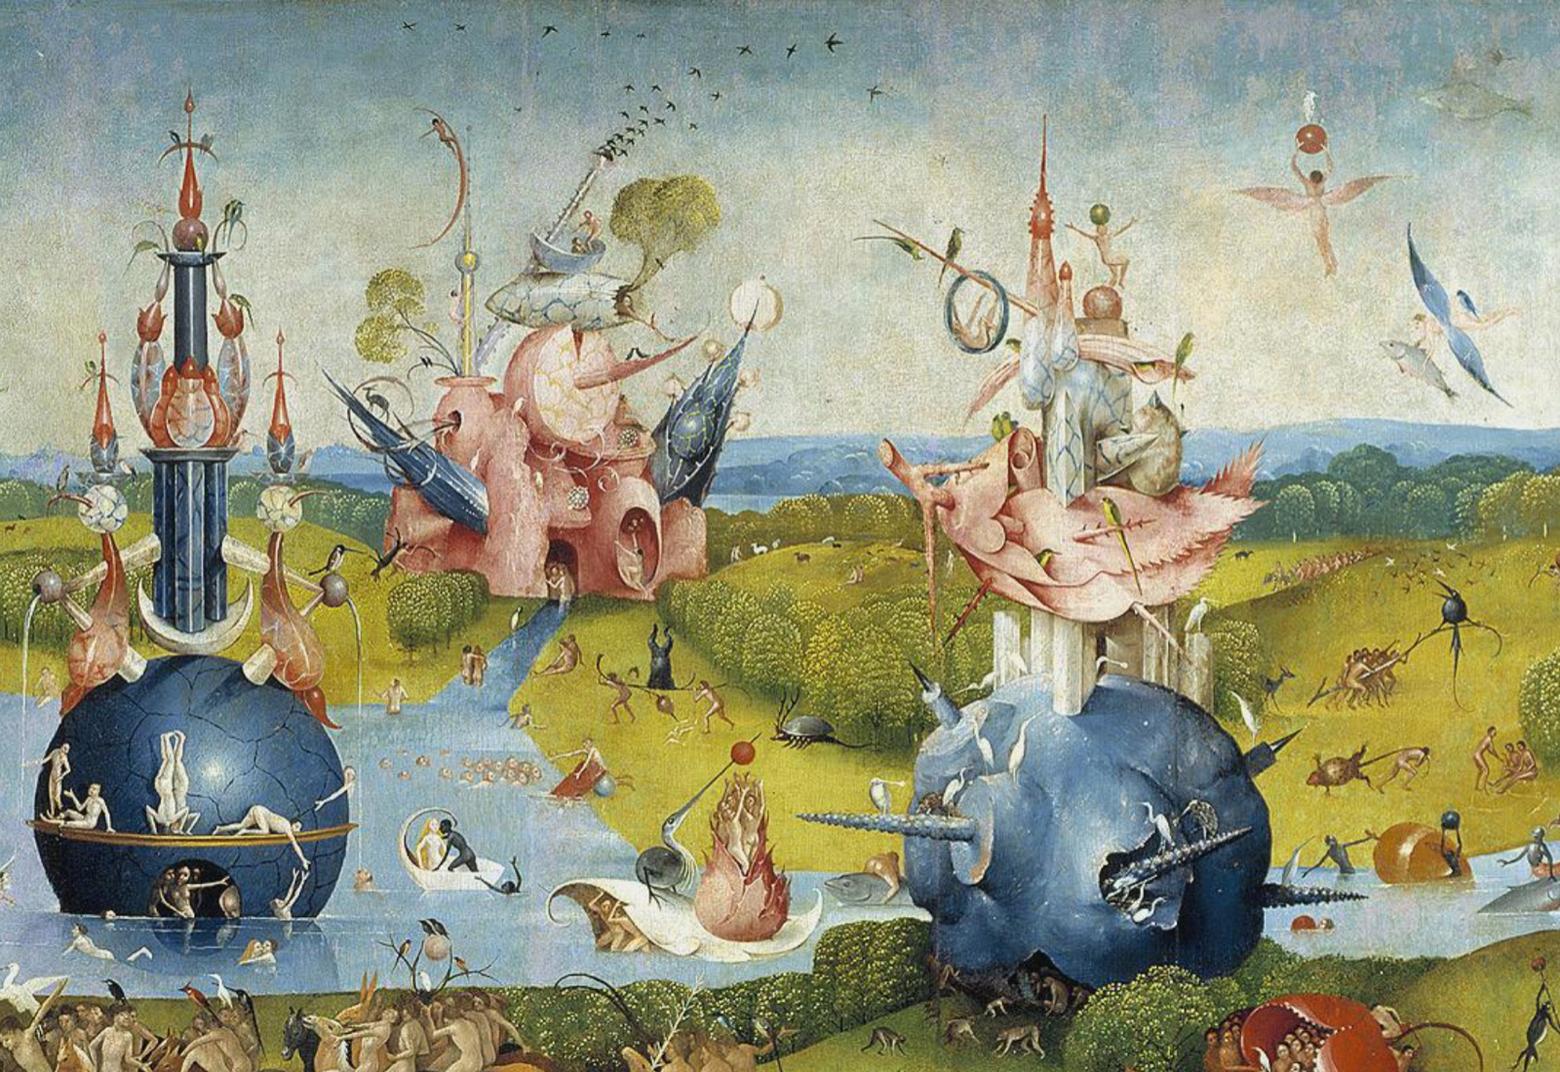 Detail of Hieronymus Bosch's masterwork 'Garden of Earthly Delights,' part of the Museo del Prado collection in Madrid, Spain. It was completed between 1490 and 1510.